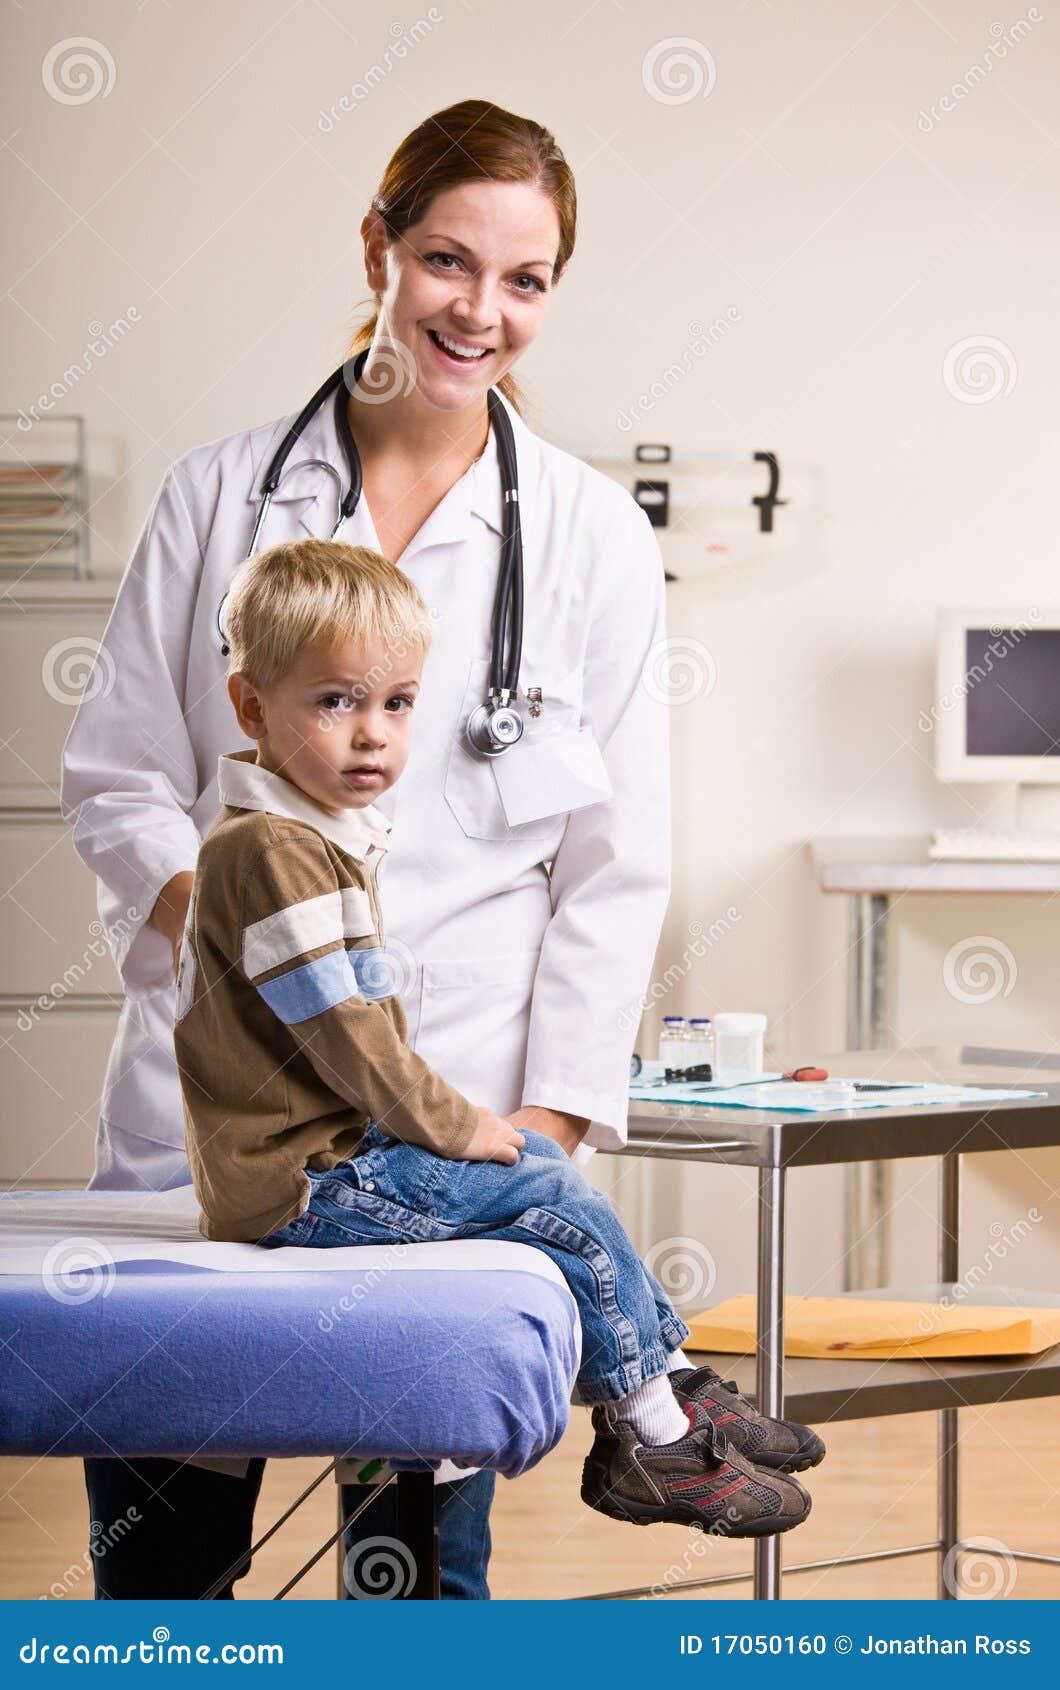 doctor giving boy checkup in doctor office